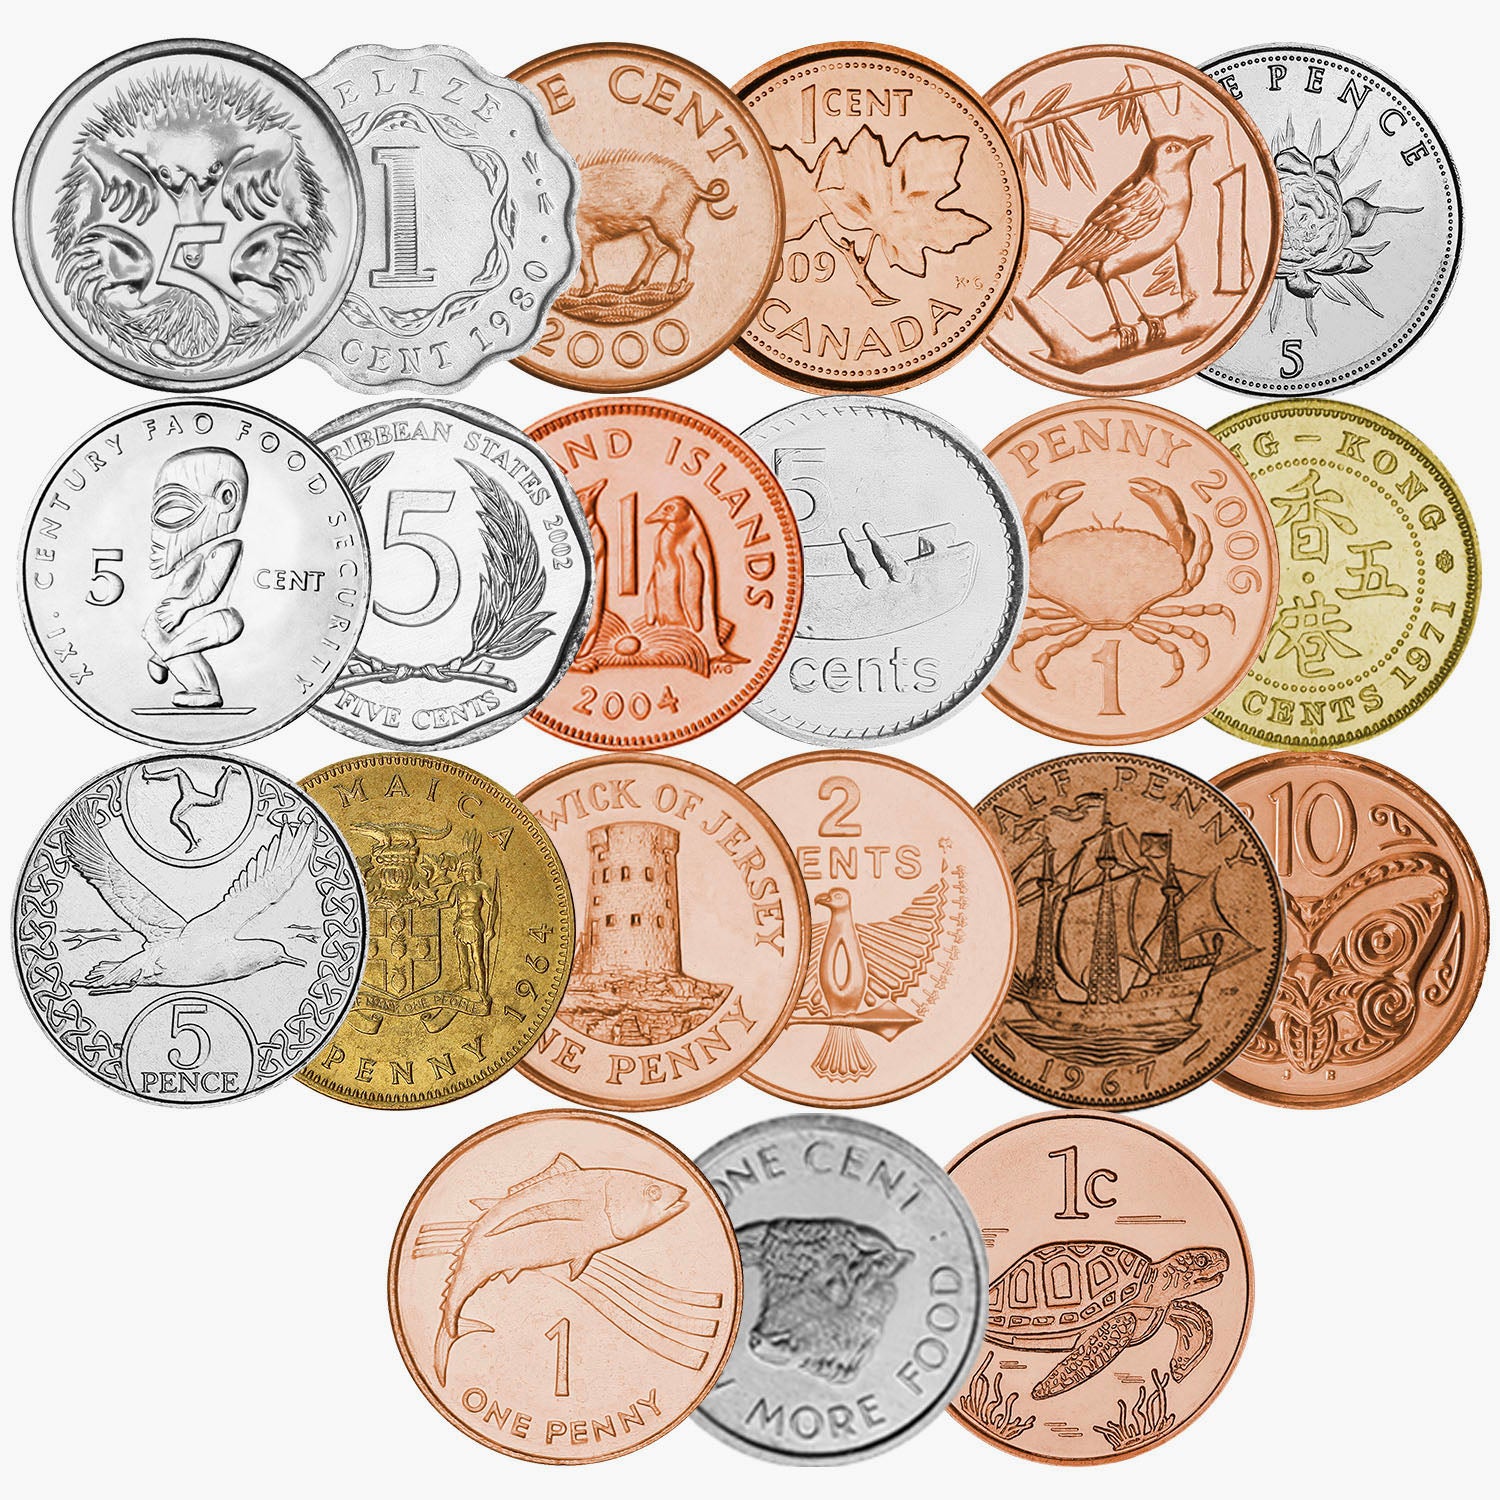 Her Majesty Queen Elizabeth II Coins from the Commonwealth Collectors Edition